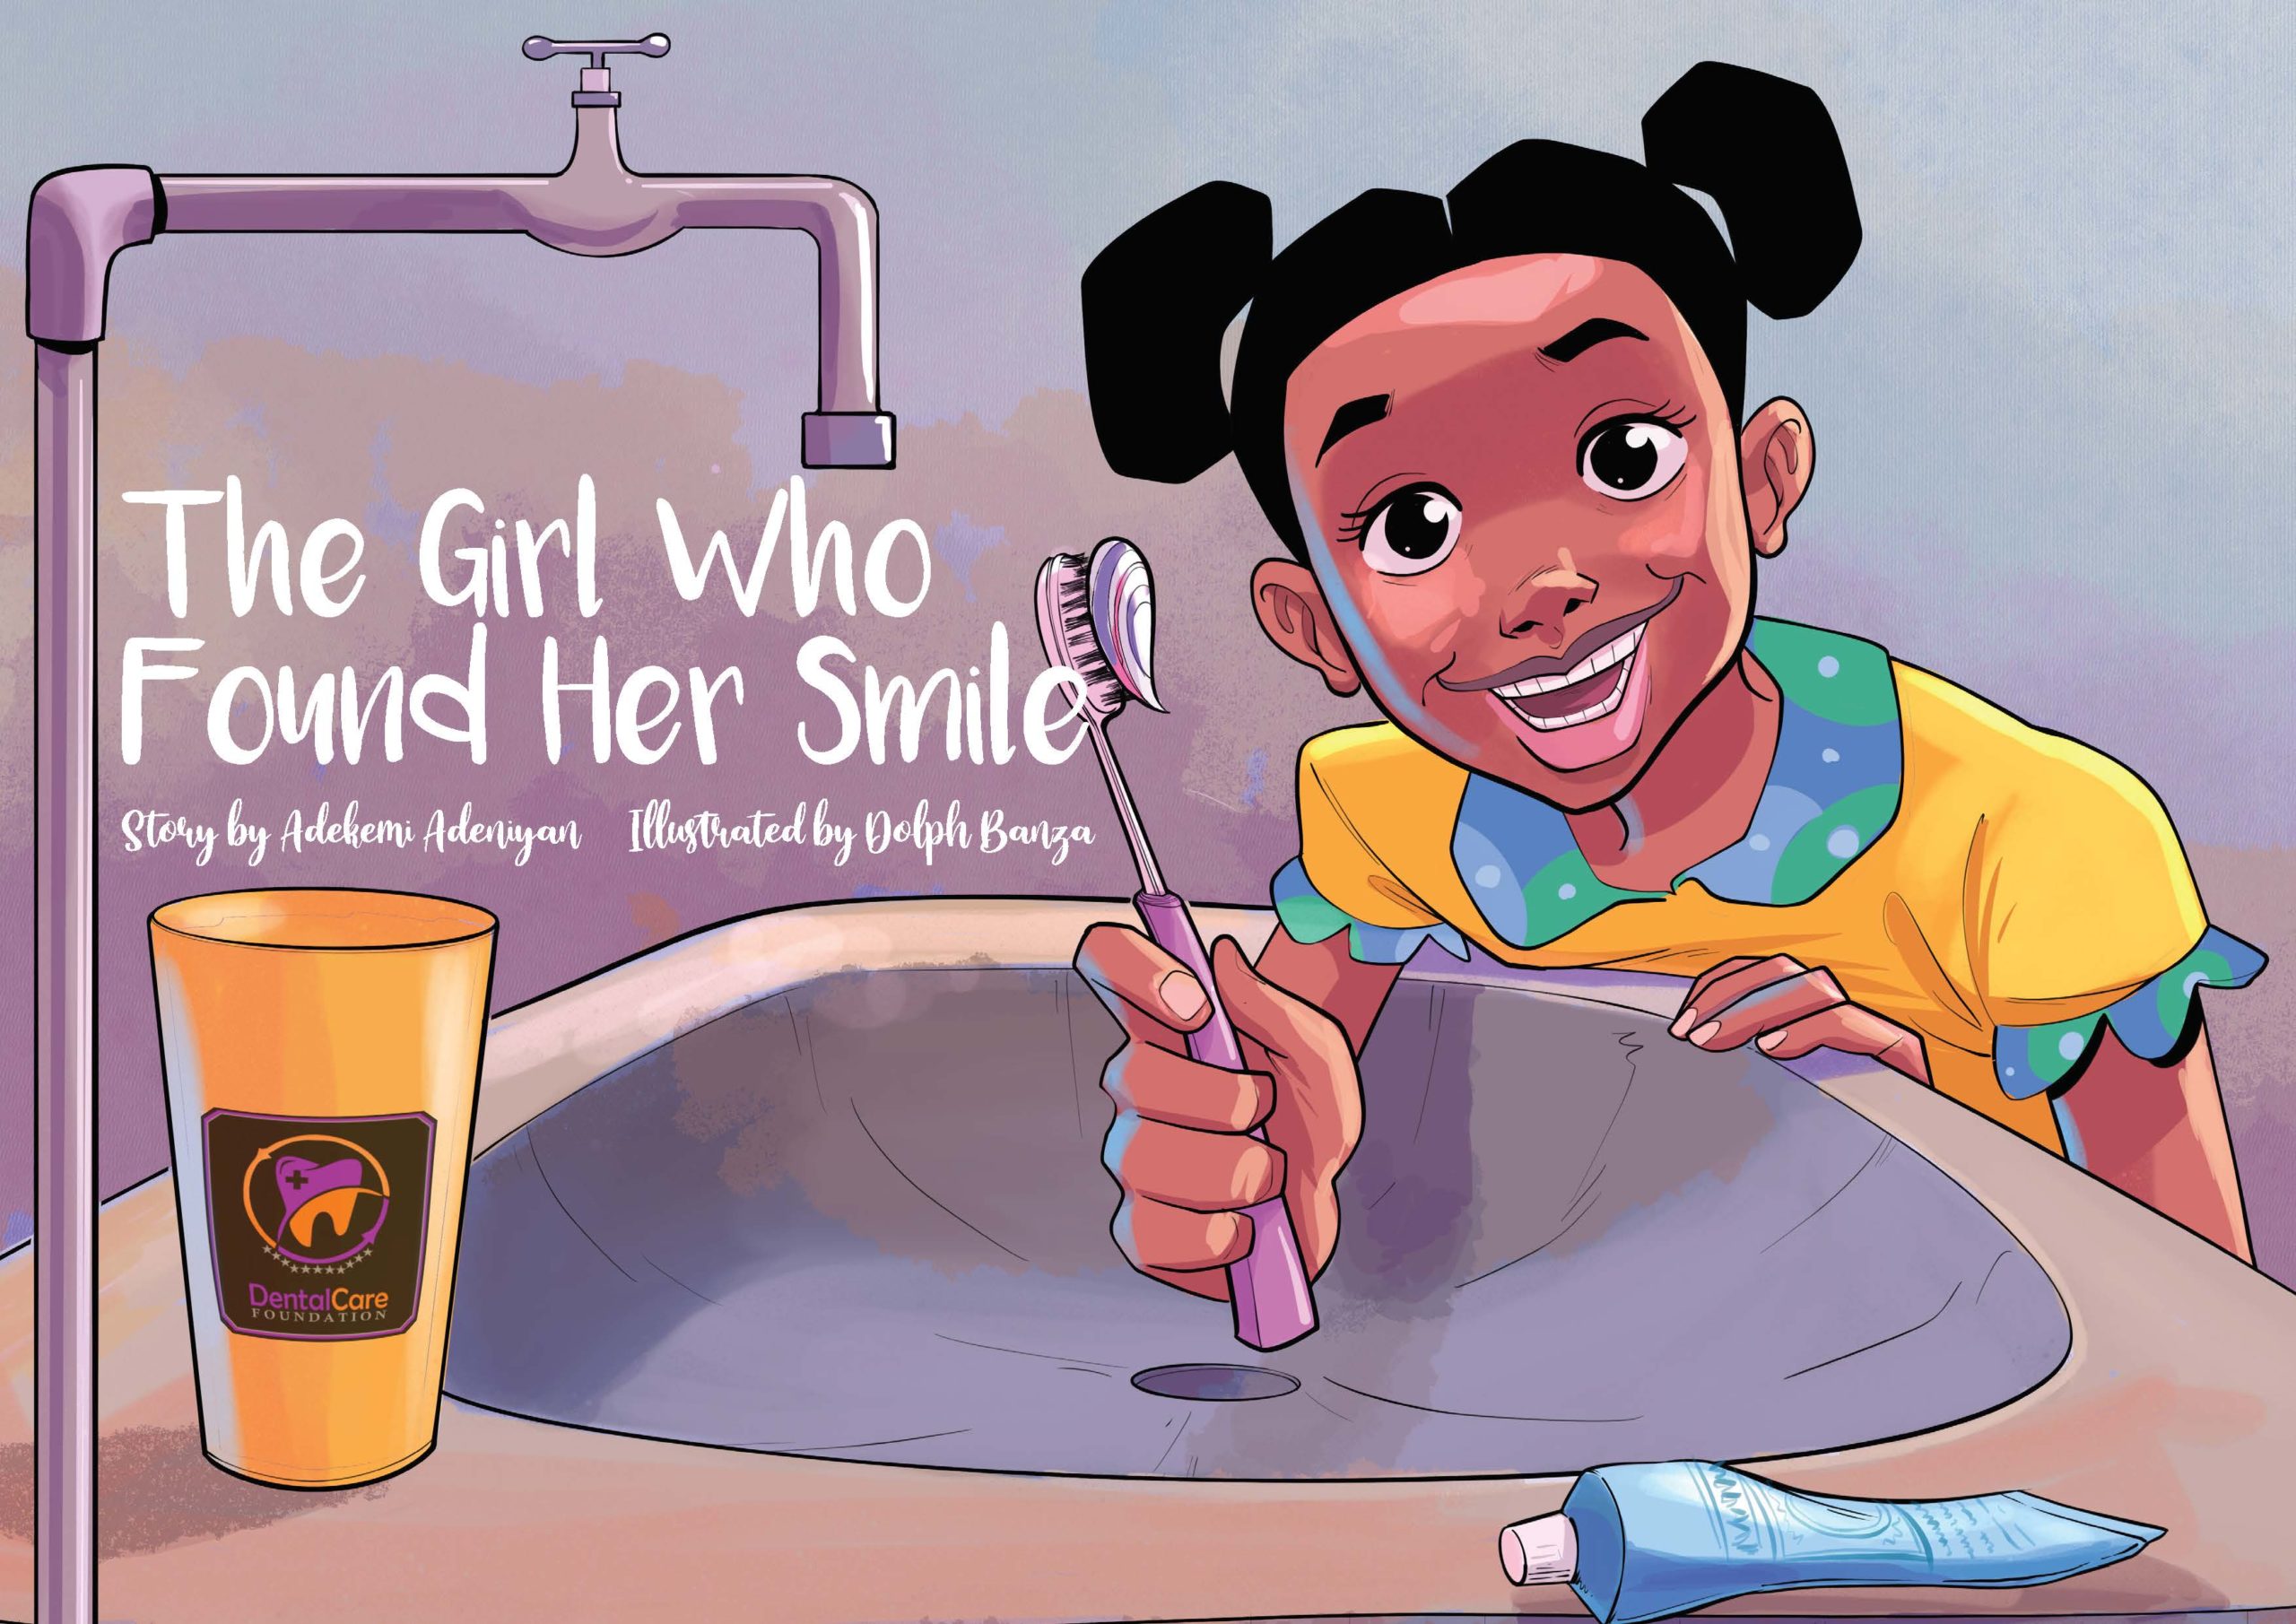 Cartoon of a child with a toothbrush